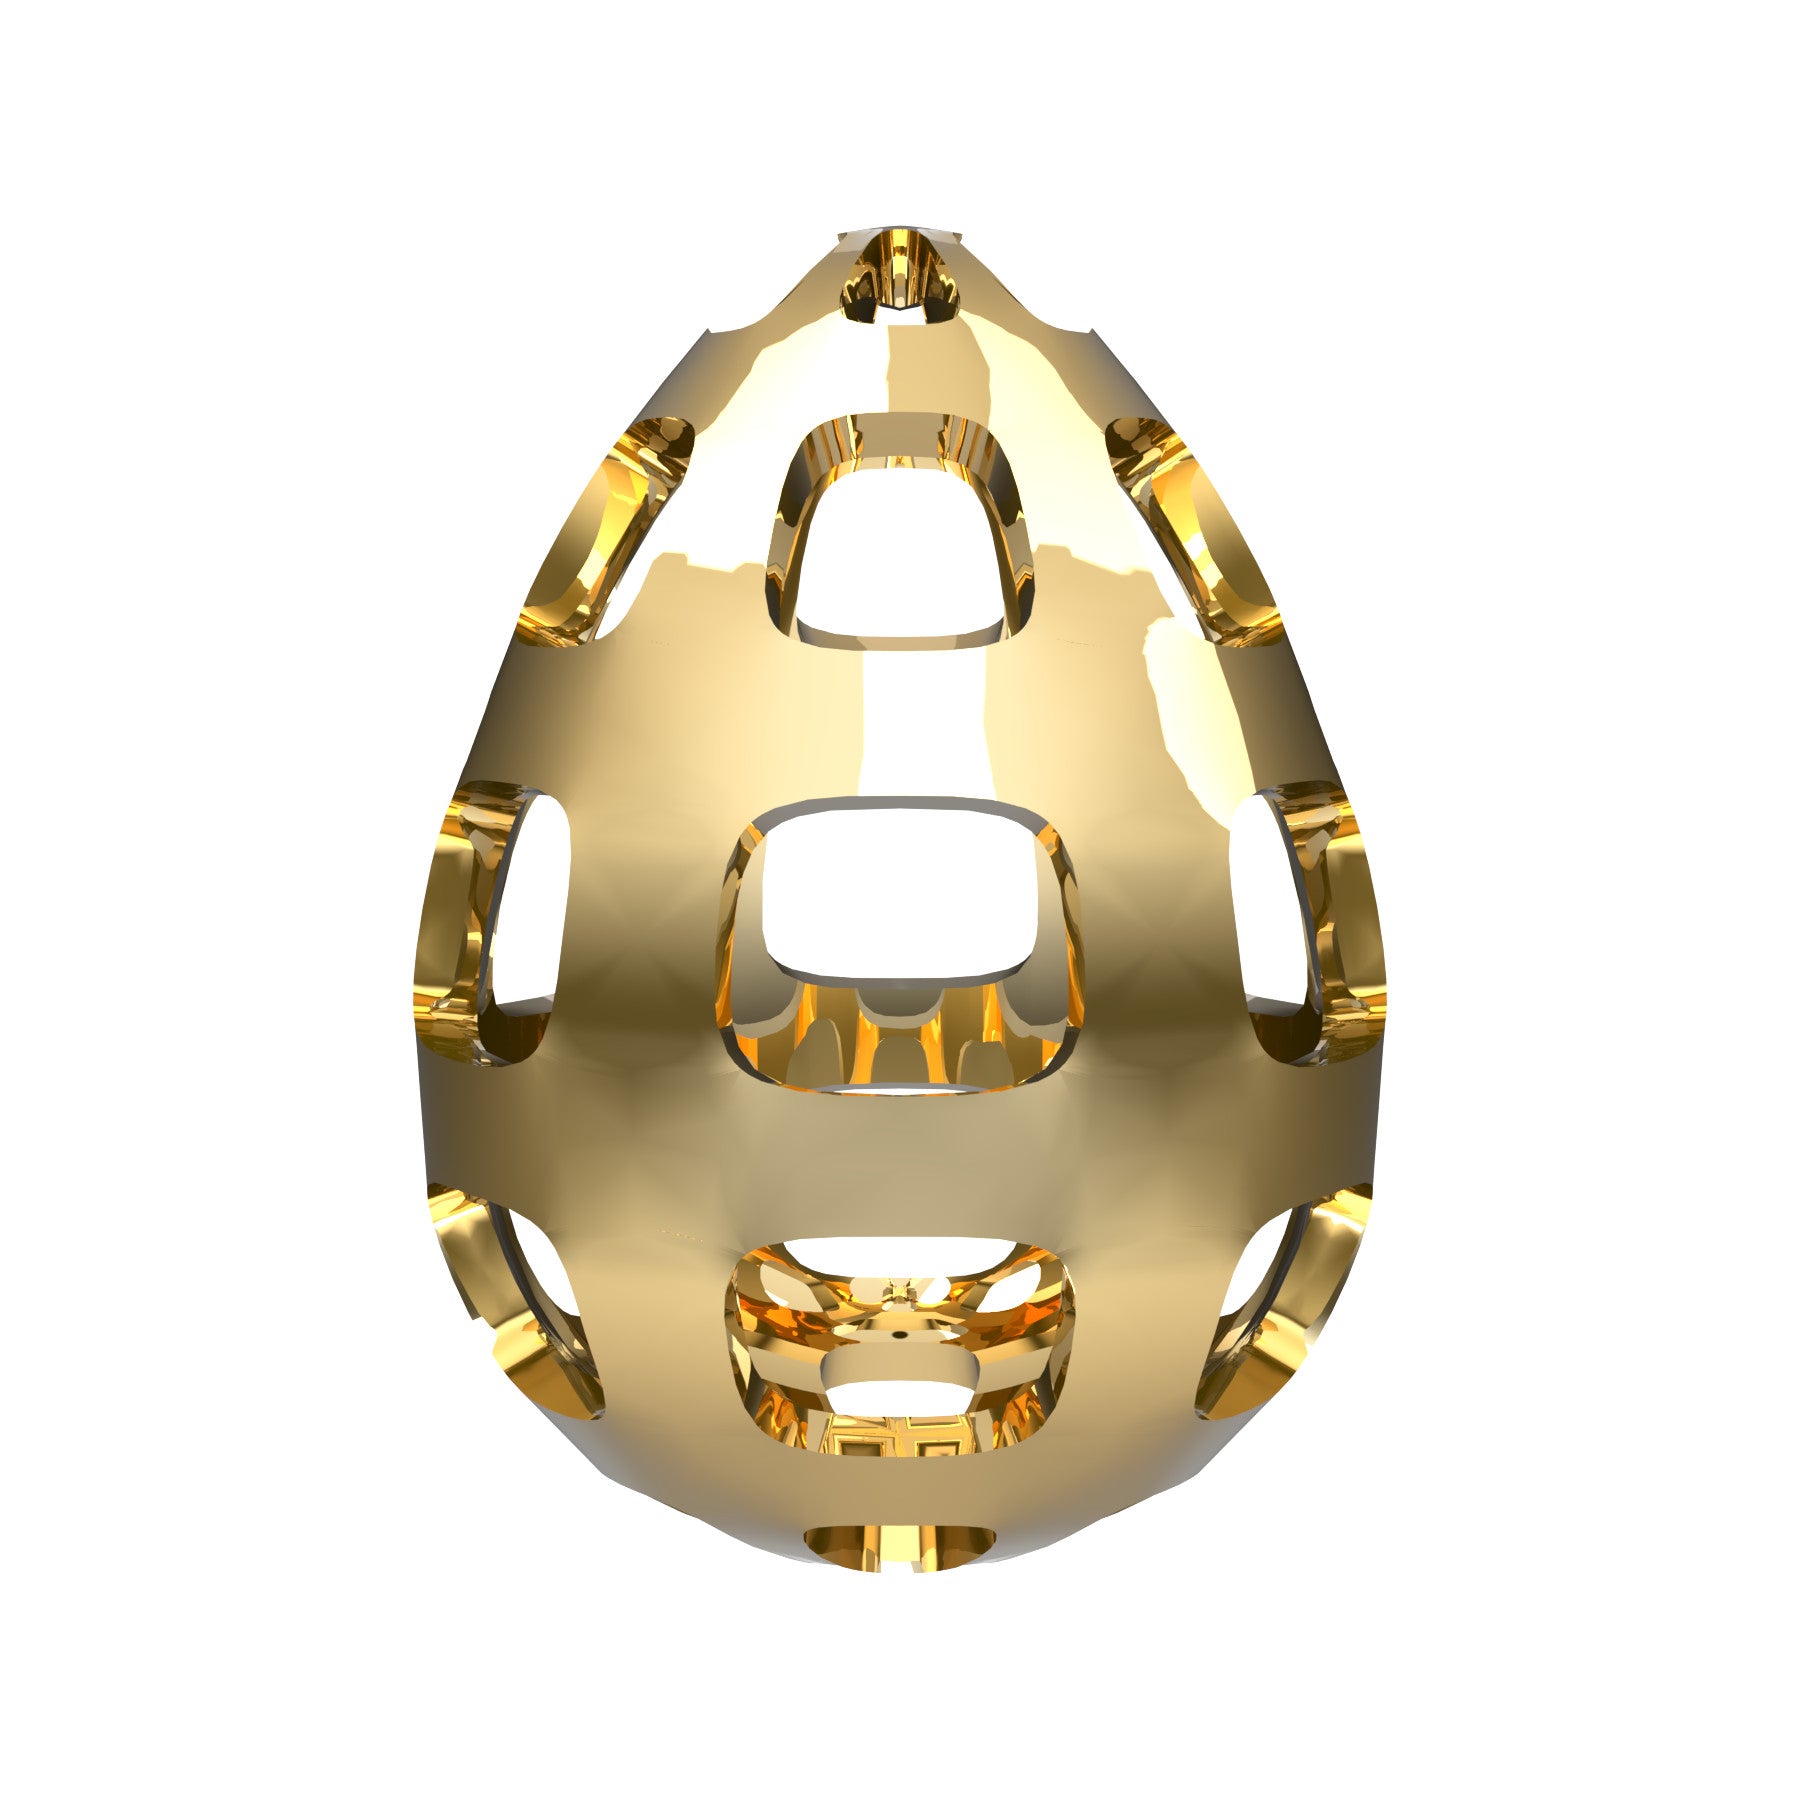 egg bomb pendant, 18 K yellow gold, weight about 16,8 g (0.59 oz), size 28,5x28,5x29,9 mm